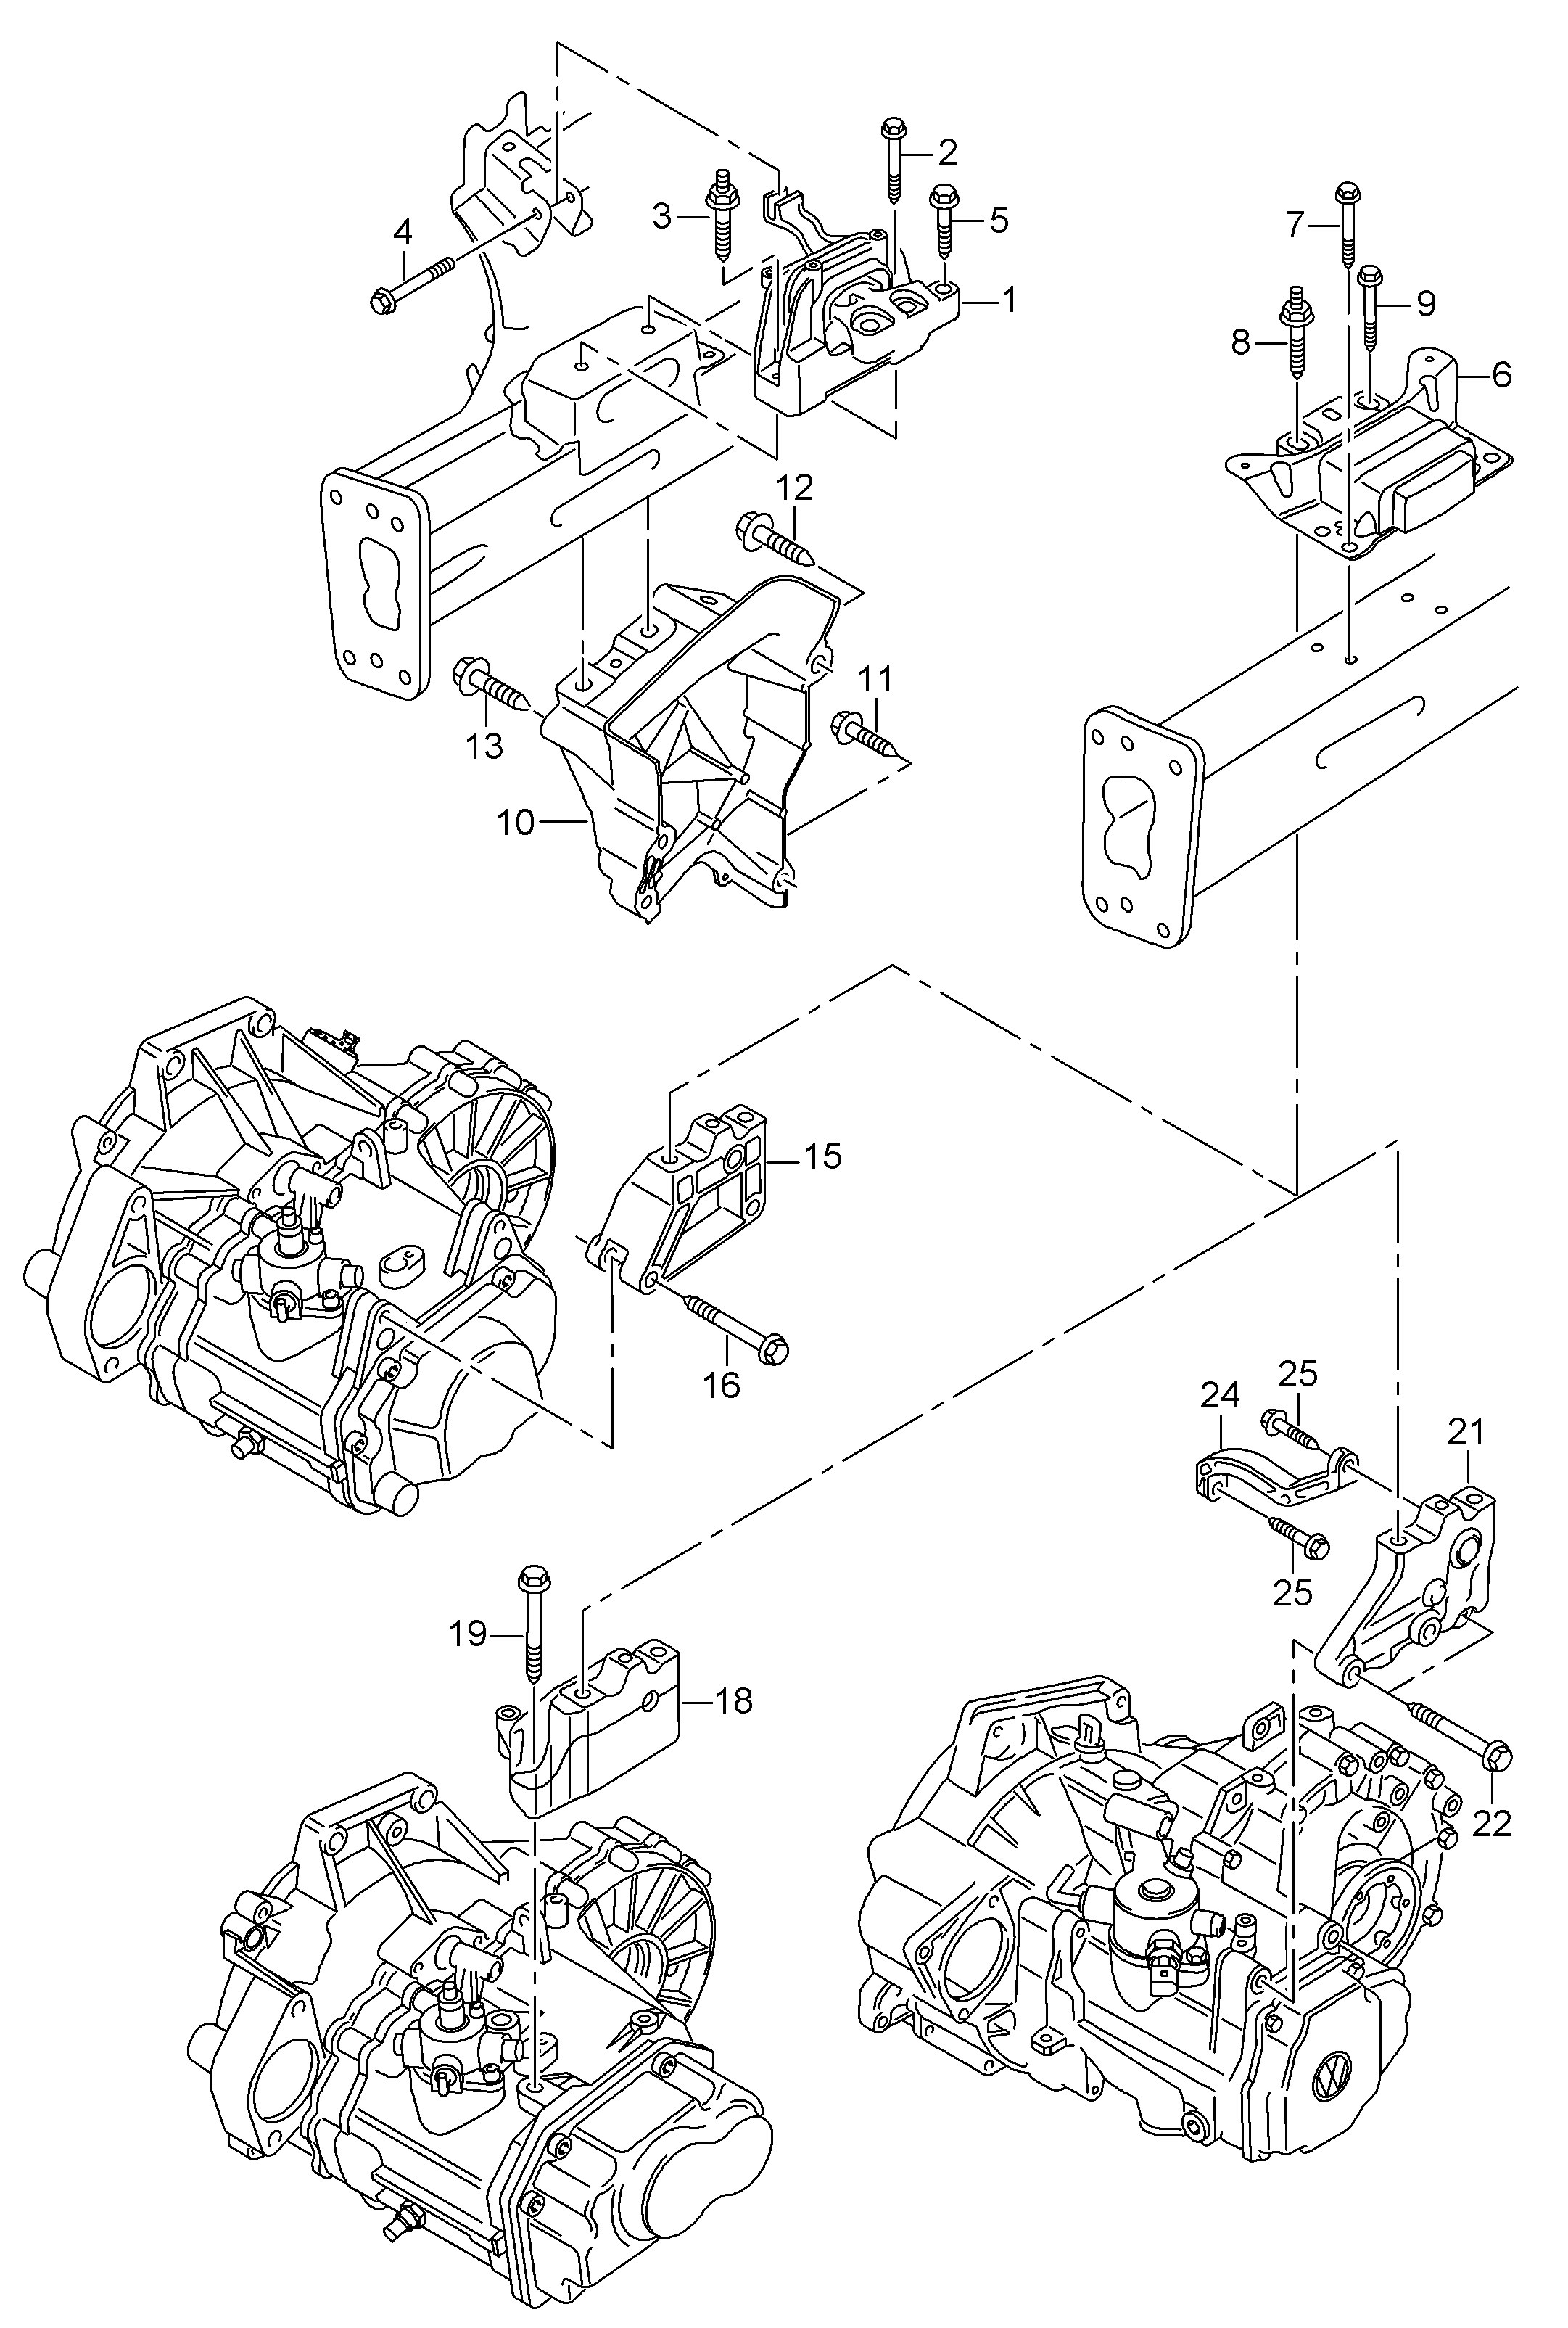 mounting parts for engine and
transmission - Leon/Leon 4(LE)  